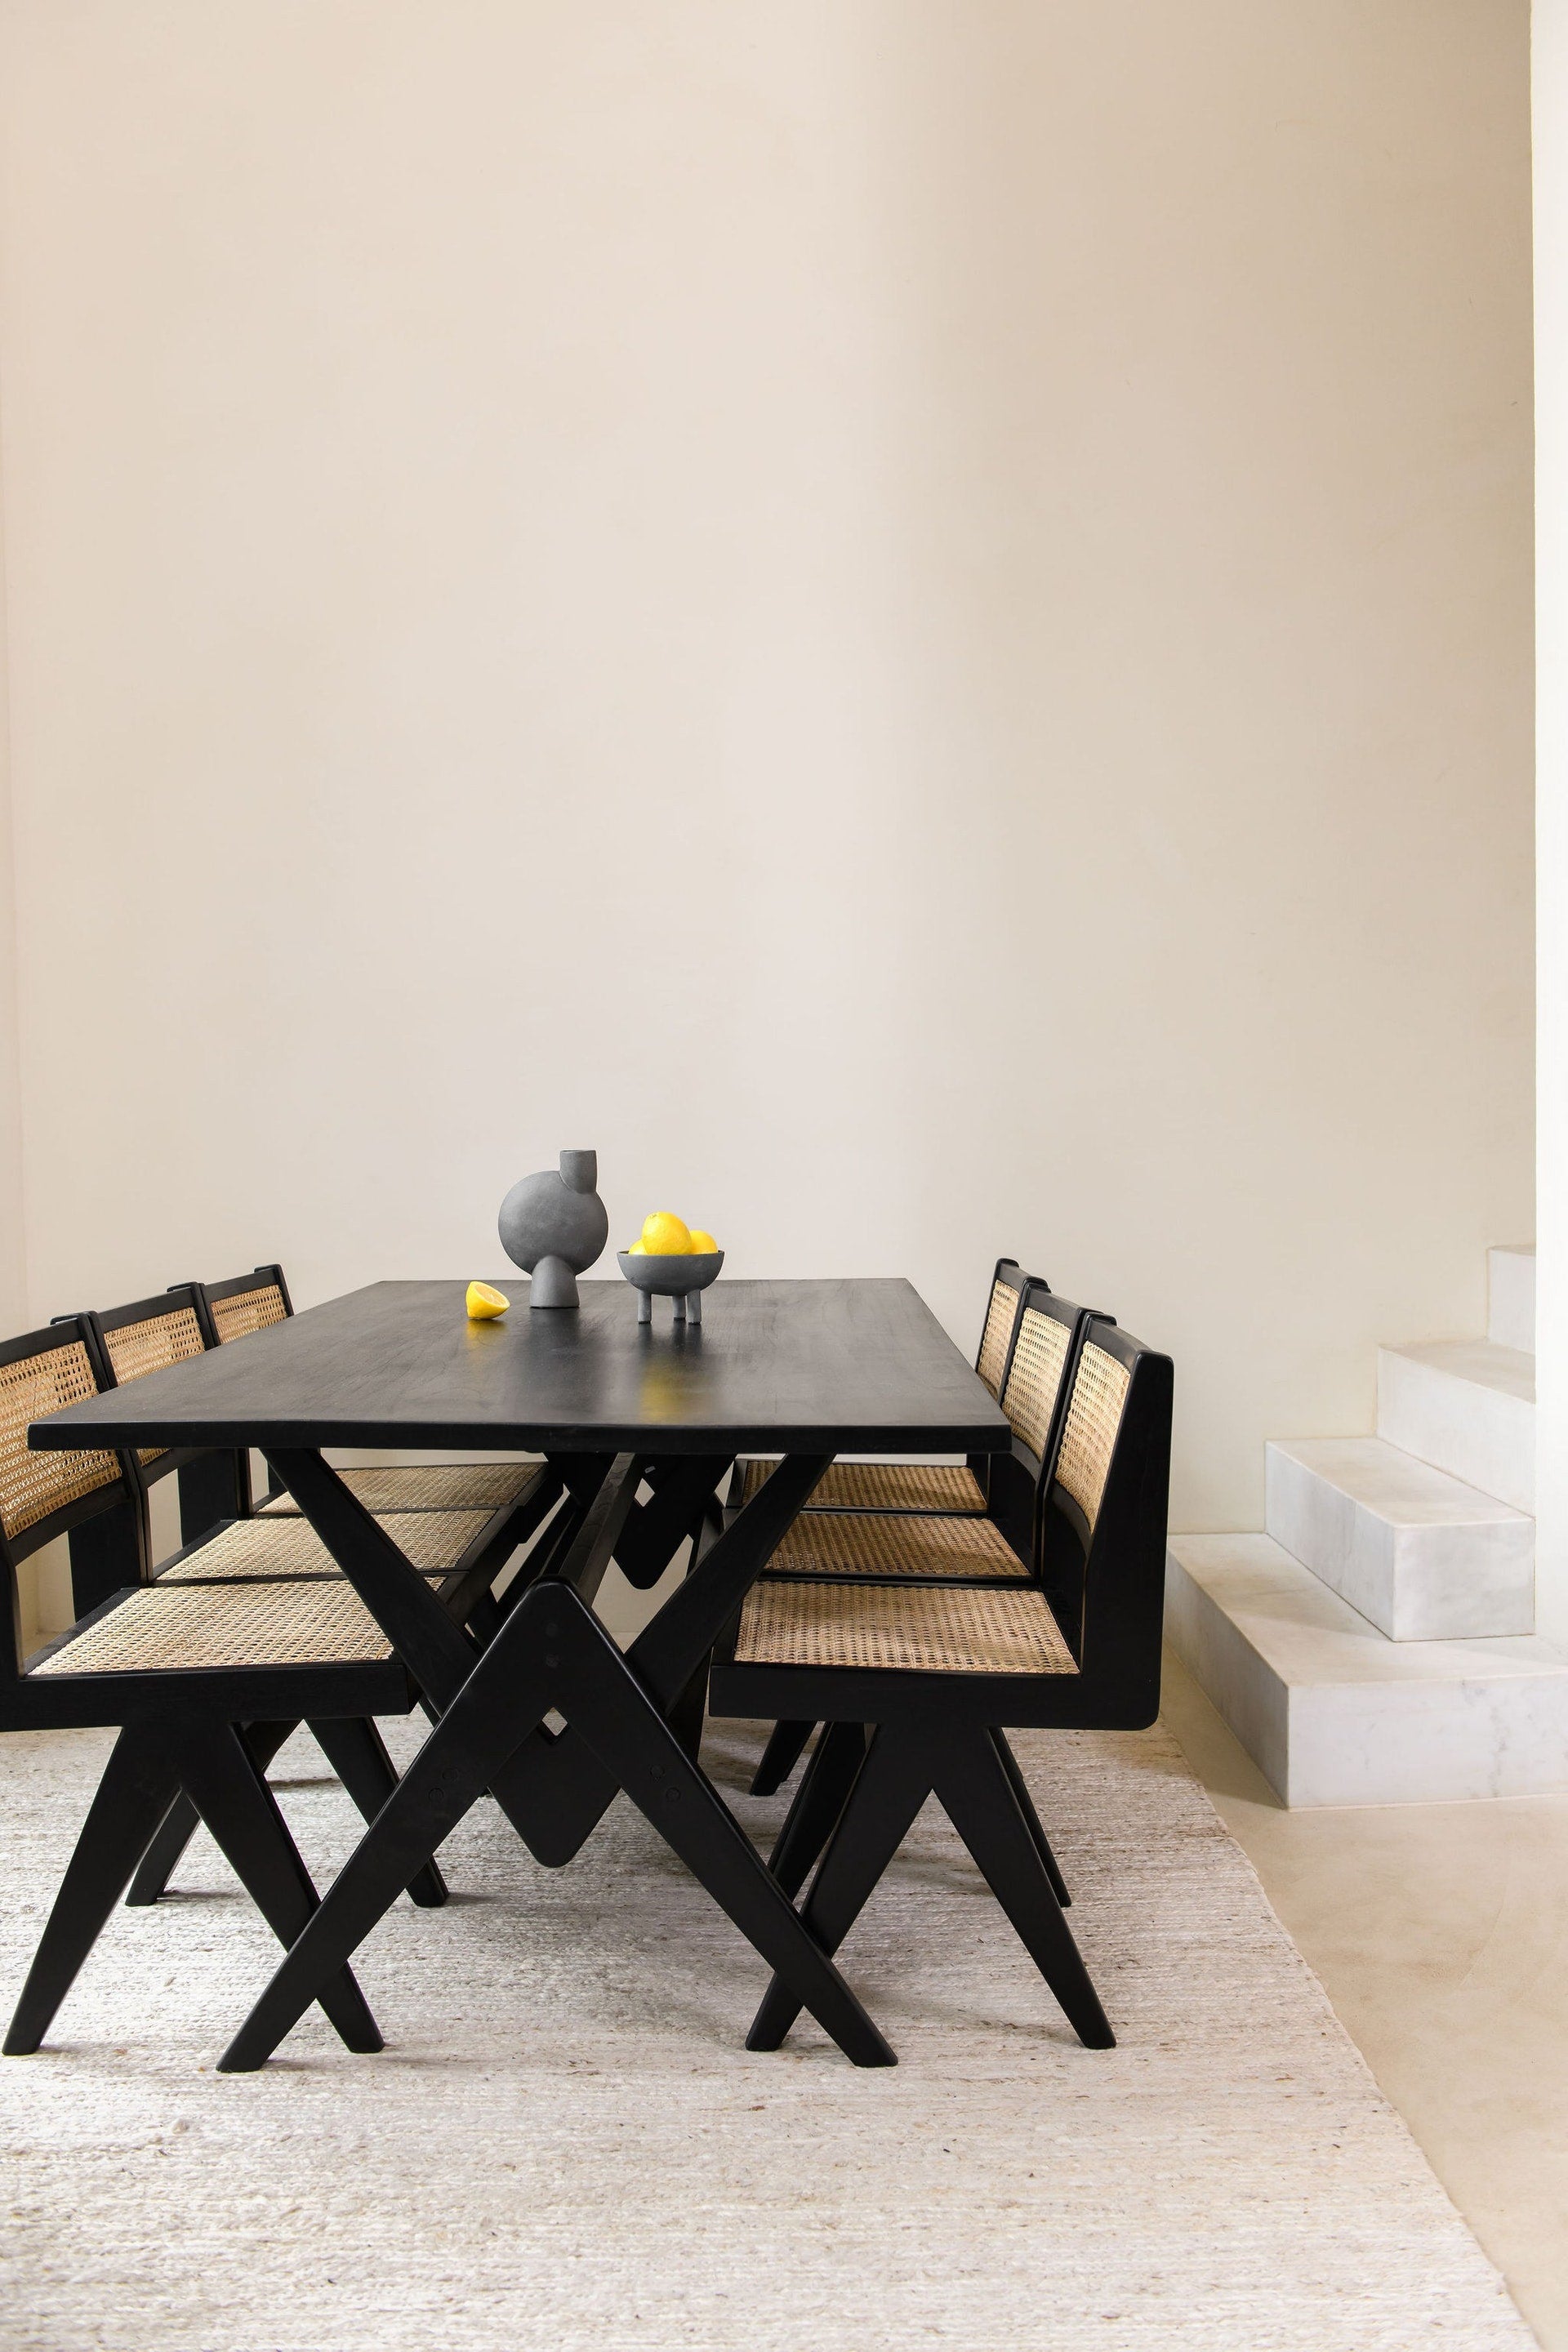 Dining Chair Easy - black